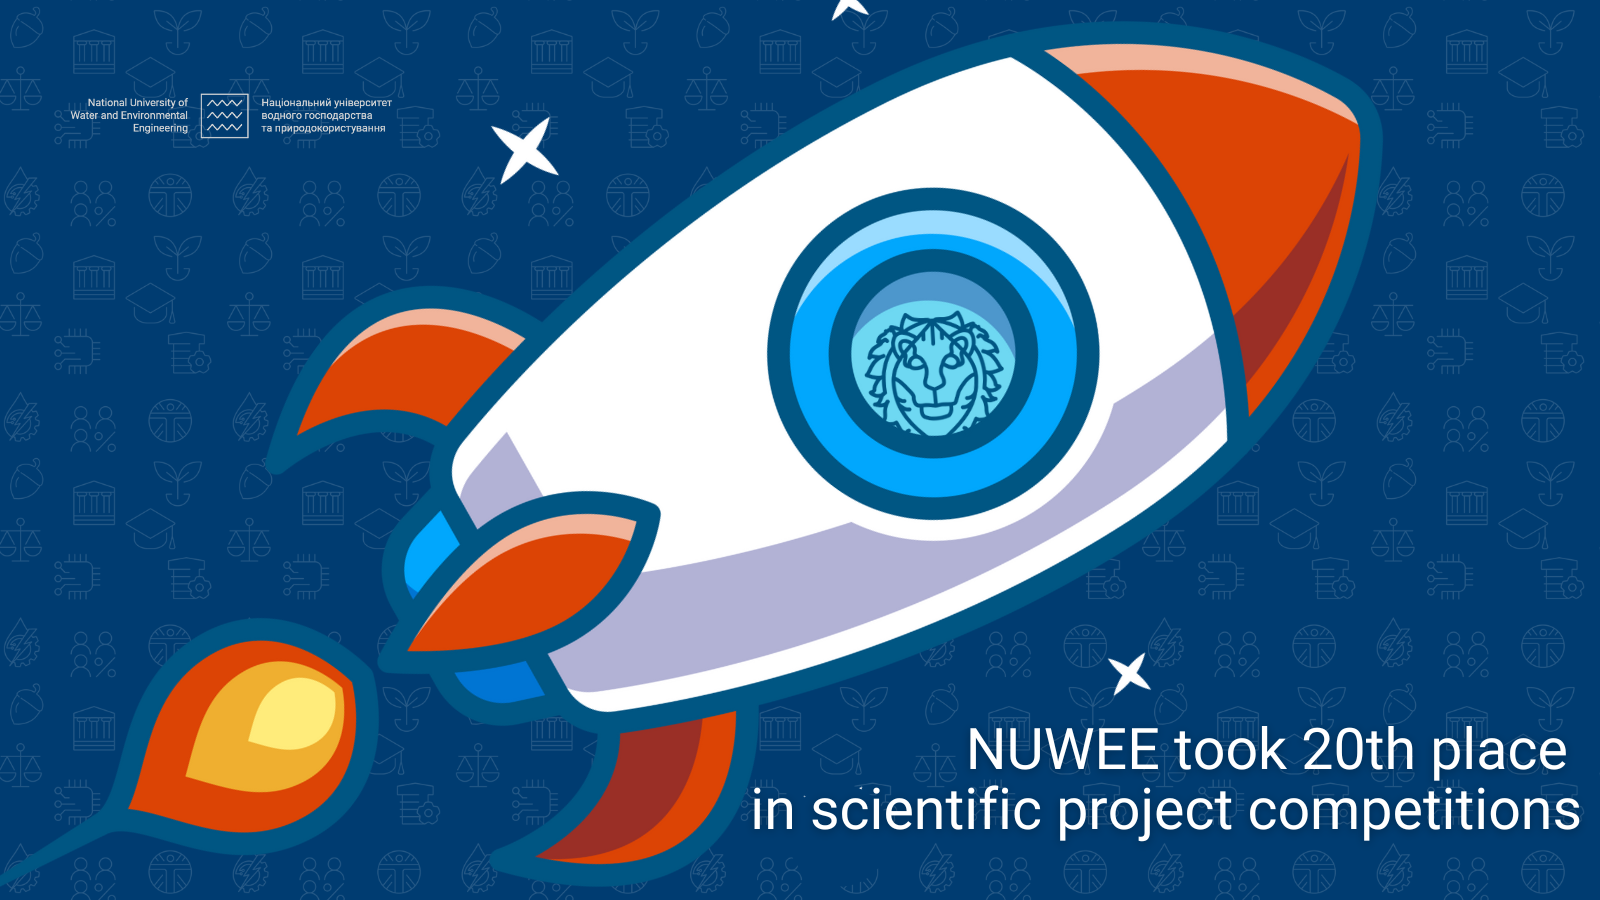 NUWEE took 20th place in scientific project competitions